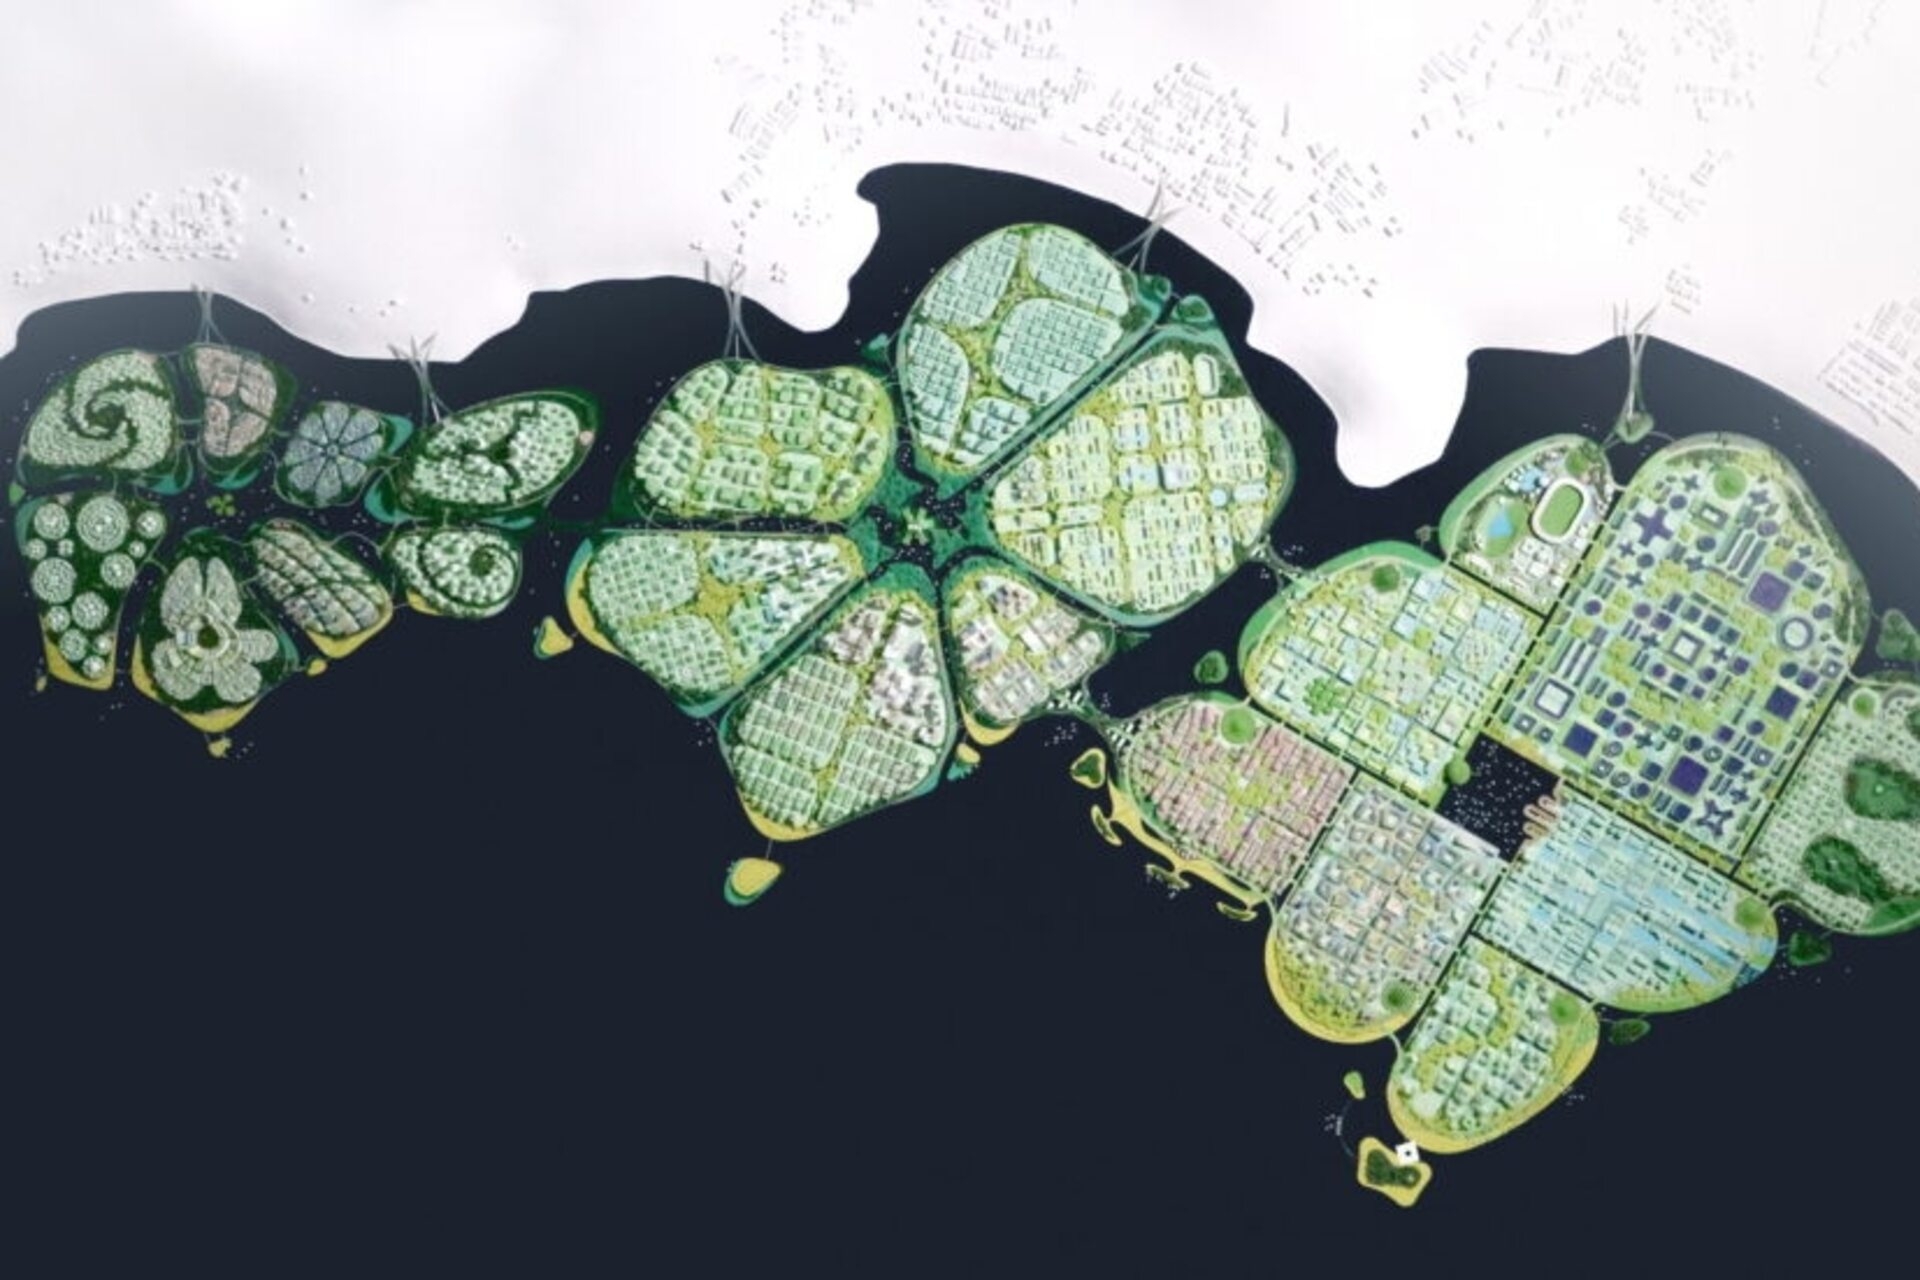 BiodiverCity: an aerial rendering of the three islands The Channels, The Mangroves and The Lagoon, which will form the innovative and sustainable city of BiodiverCity in 2030 in Malaysia near Penang